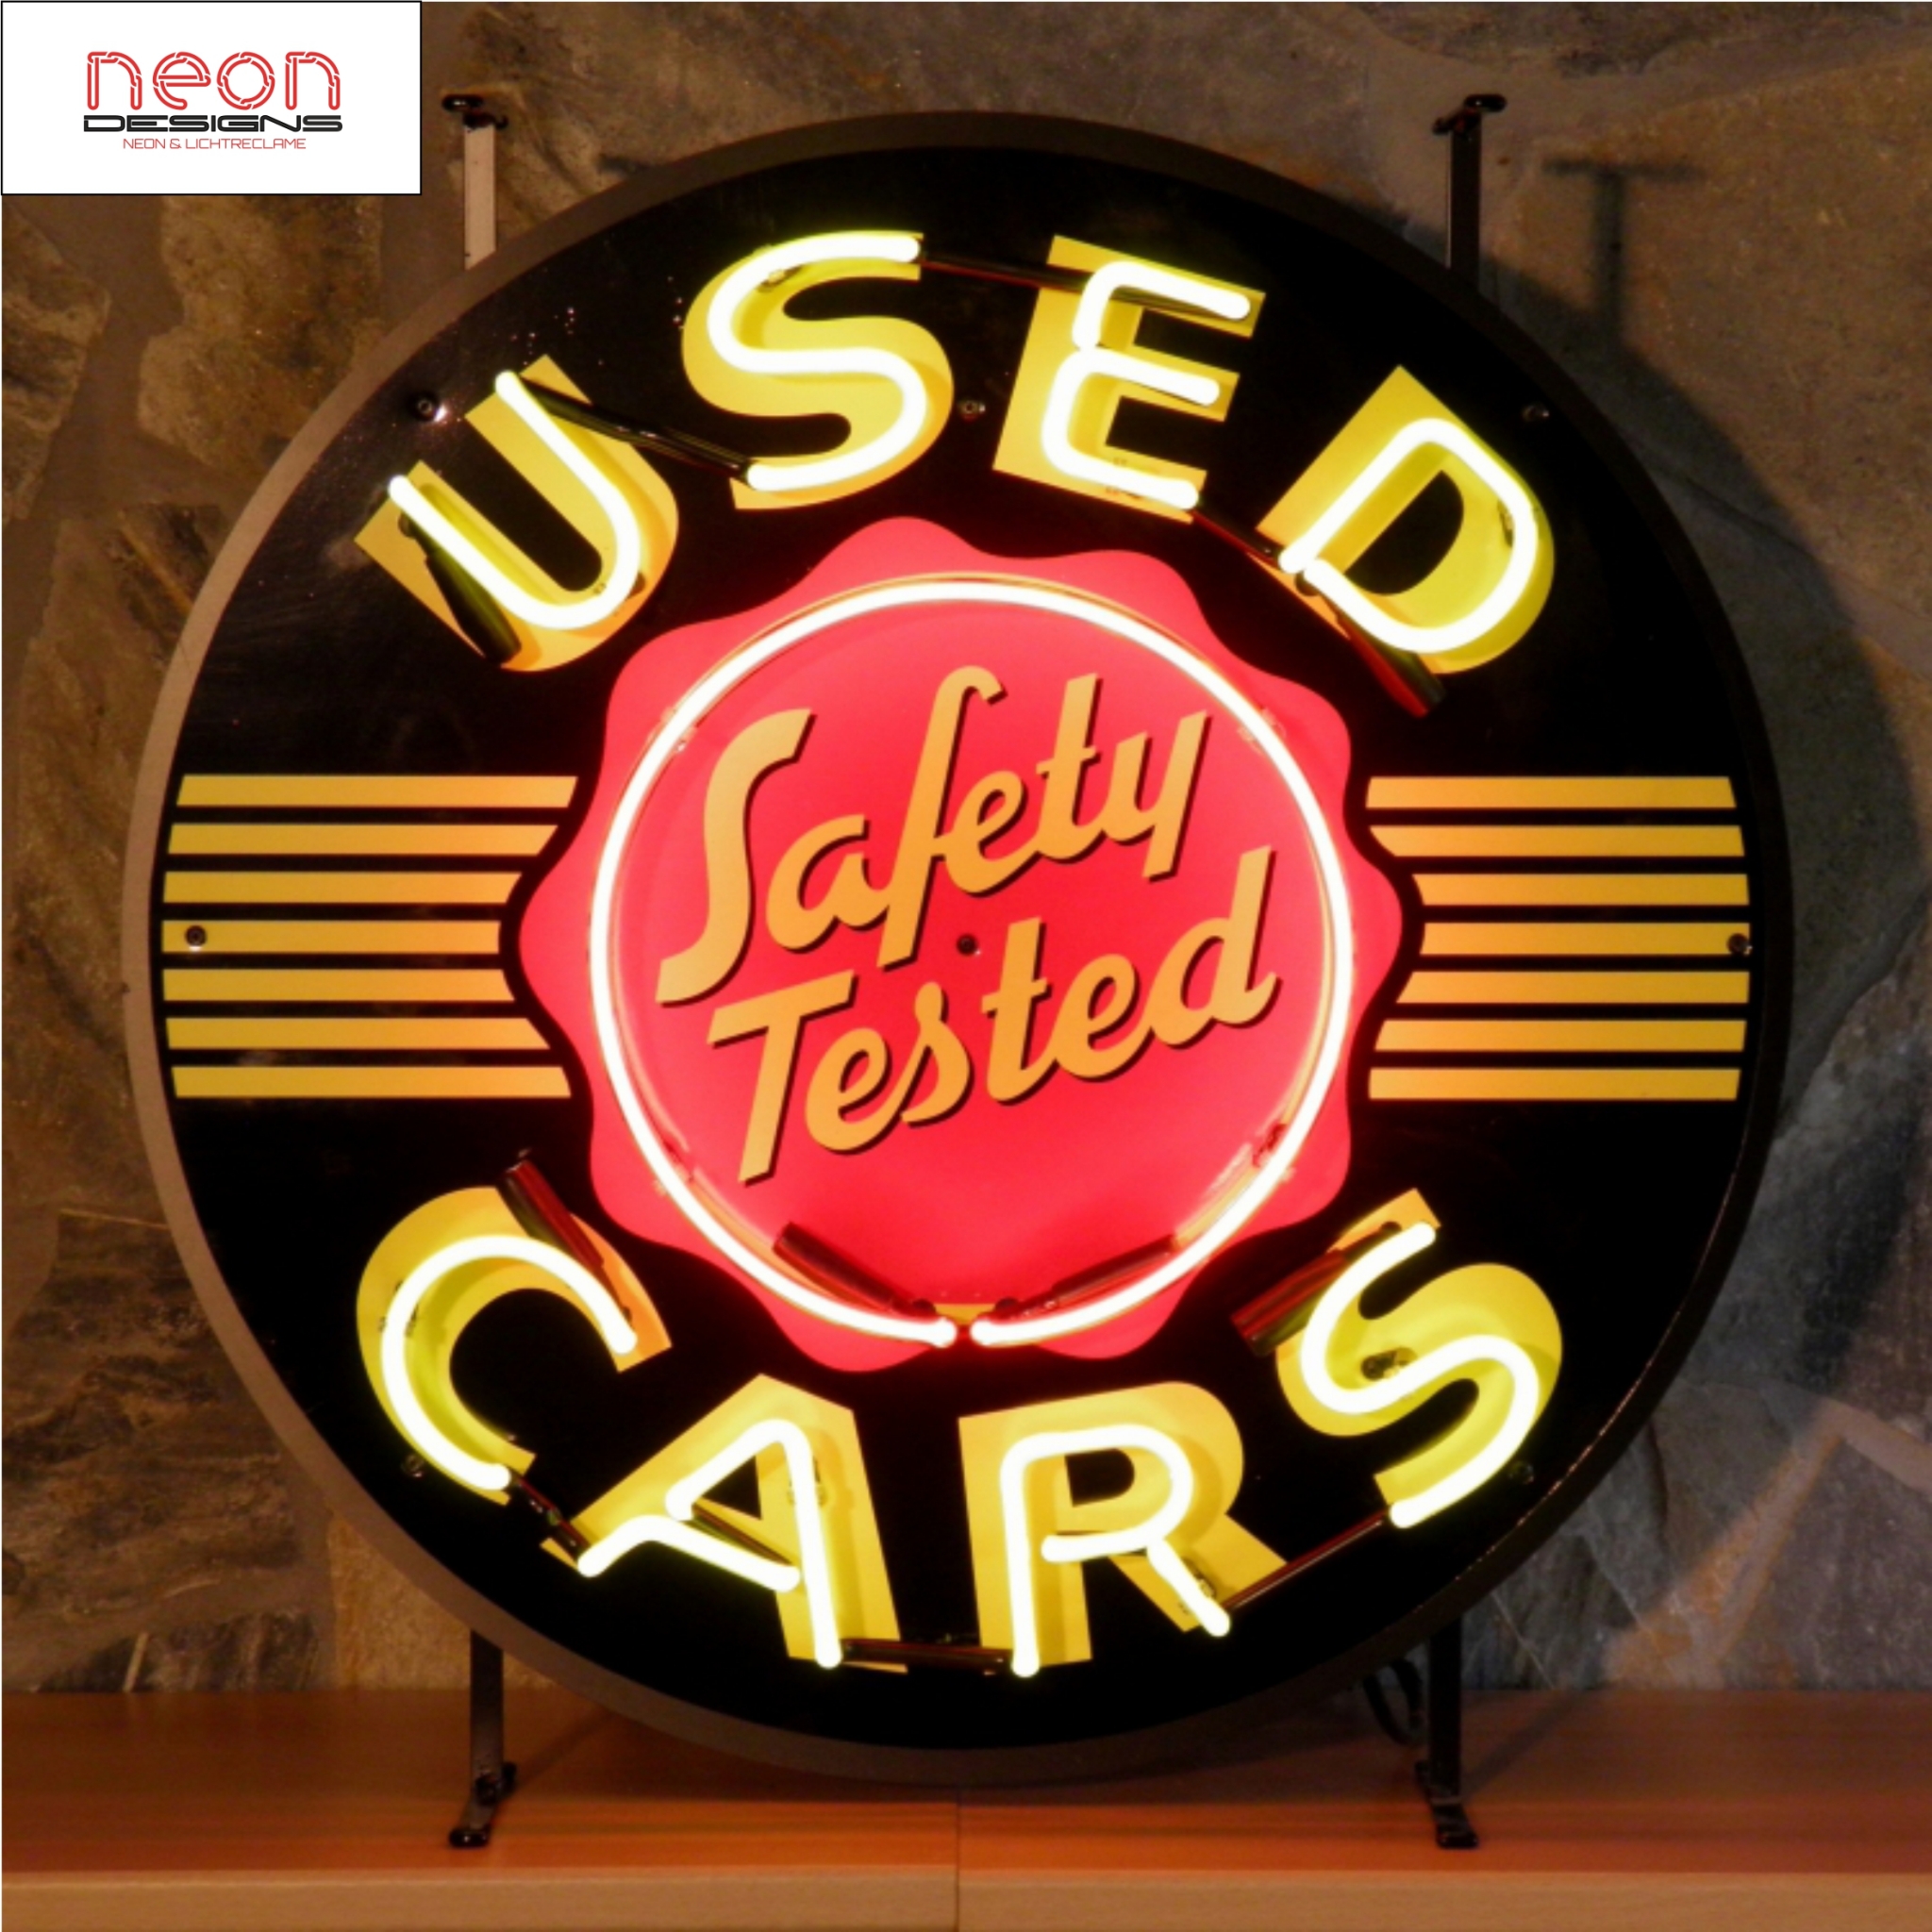 neon Used Cars